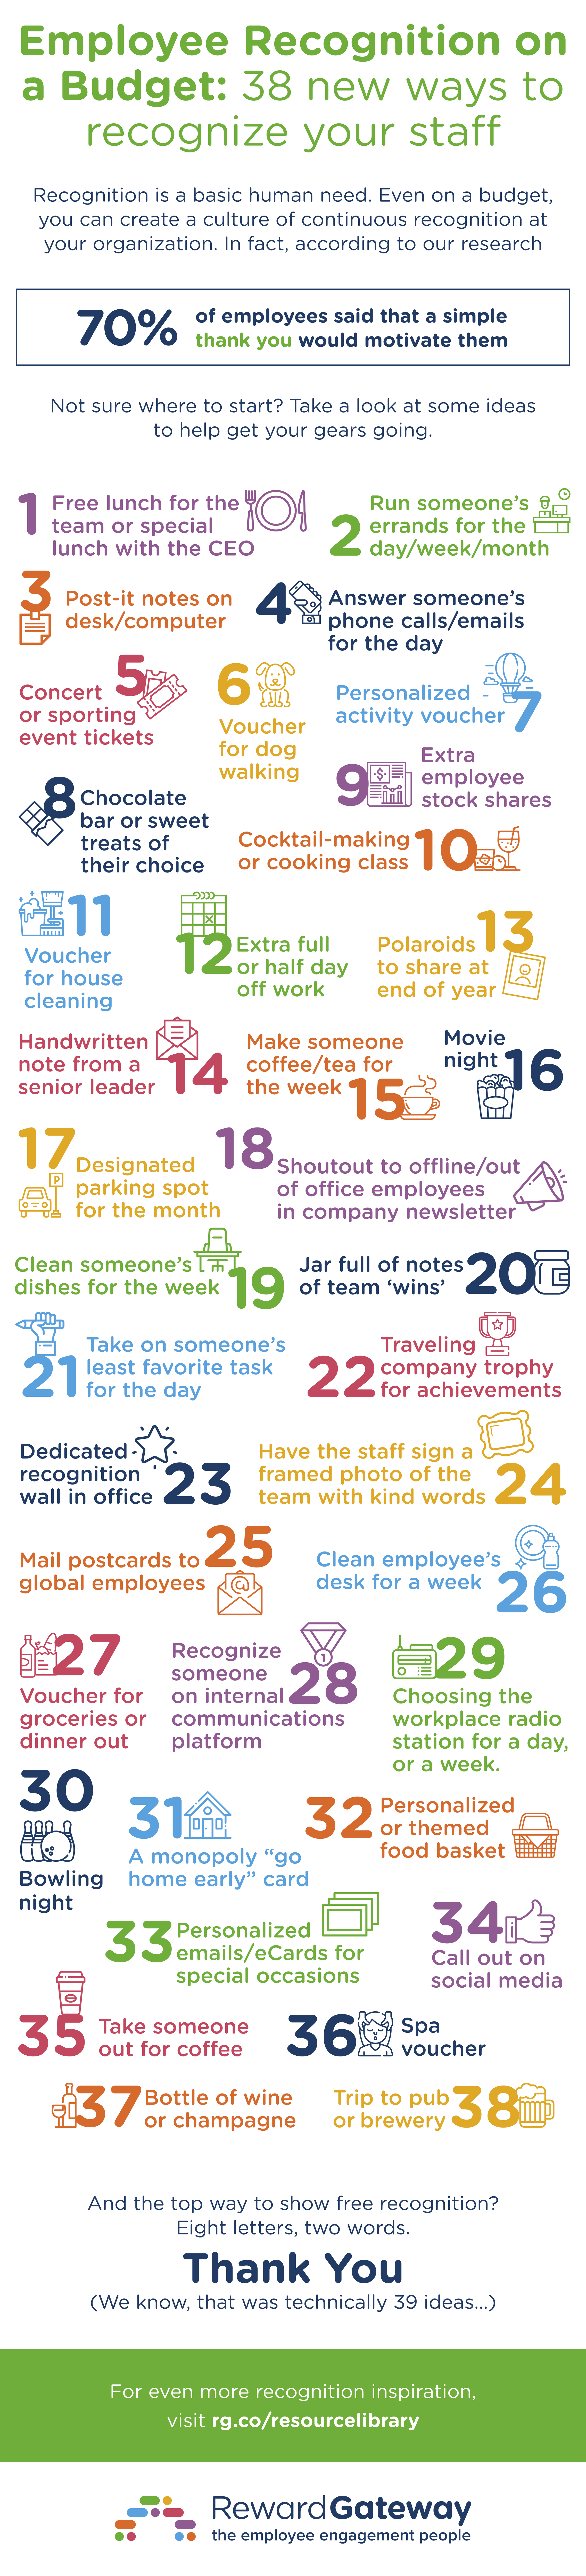 38-new-ways-recognize-staff-us.png